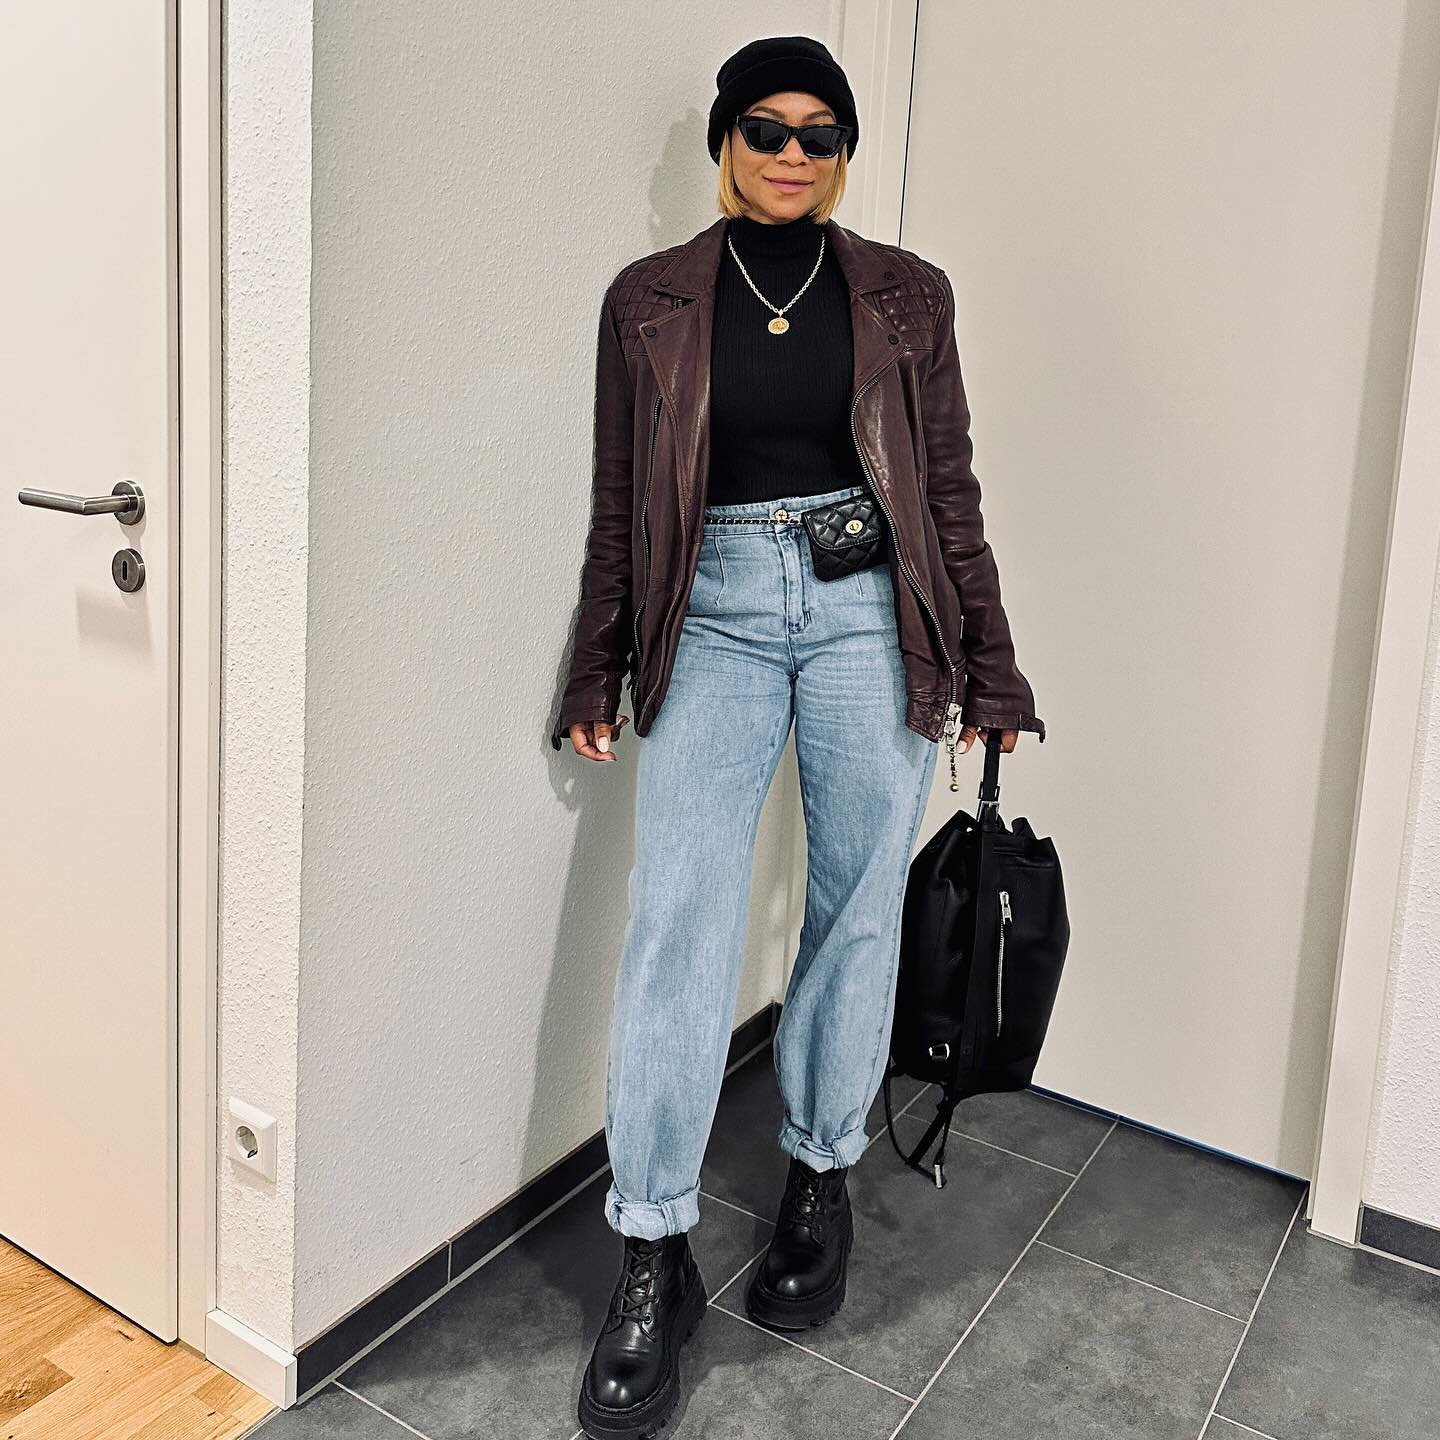 Chic, edgy, tomboyish, sometimes classy, fly etc&hellip;you name it and that&rsquo;s my style🤣 Versatile but I know my vibe👍🏽 

Step outside of your boxes. Happy Sunday loves🫶🏽

#versatilestyle #tomboychic #styledefined #stylishlook #everydayout